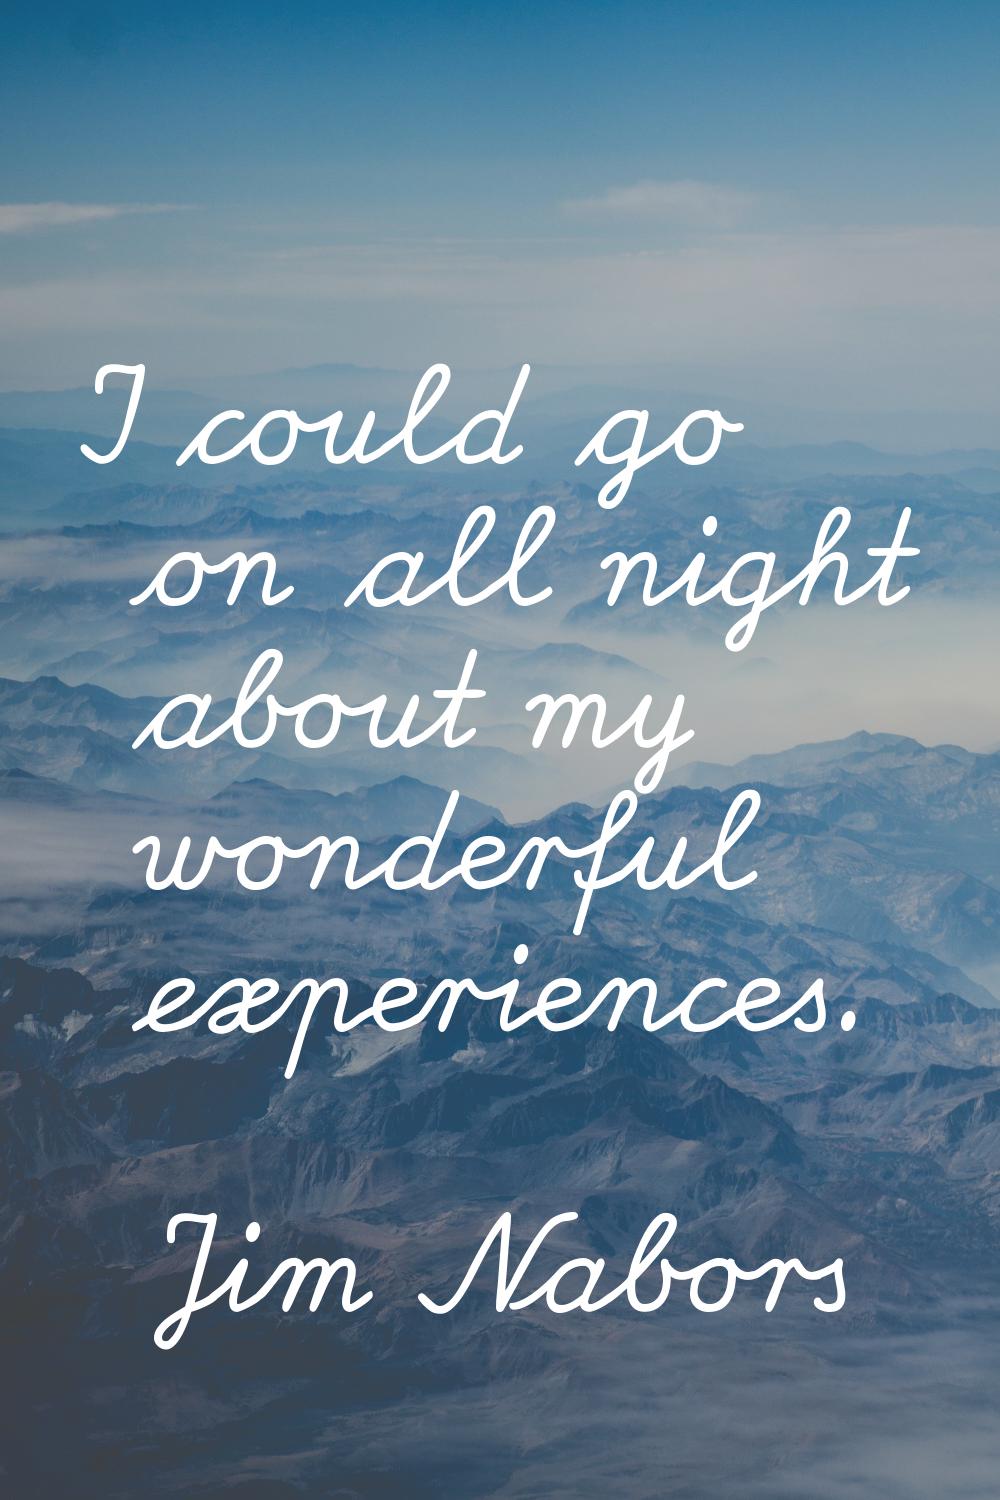 I could go on all night about my wonderful experiences.